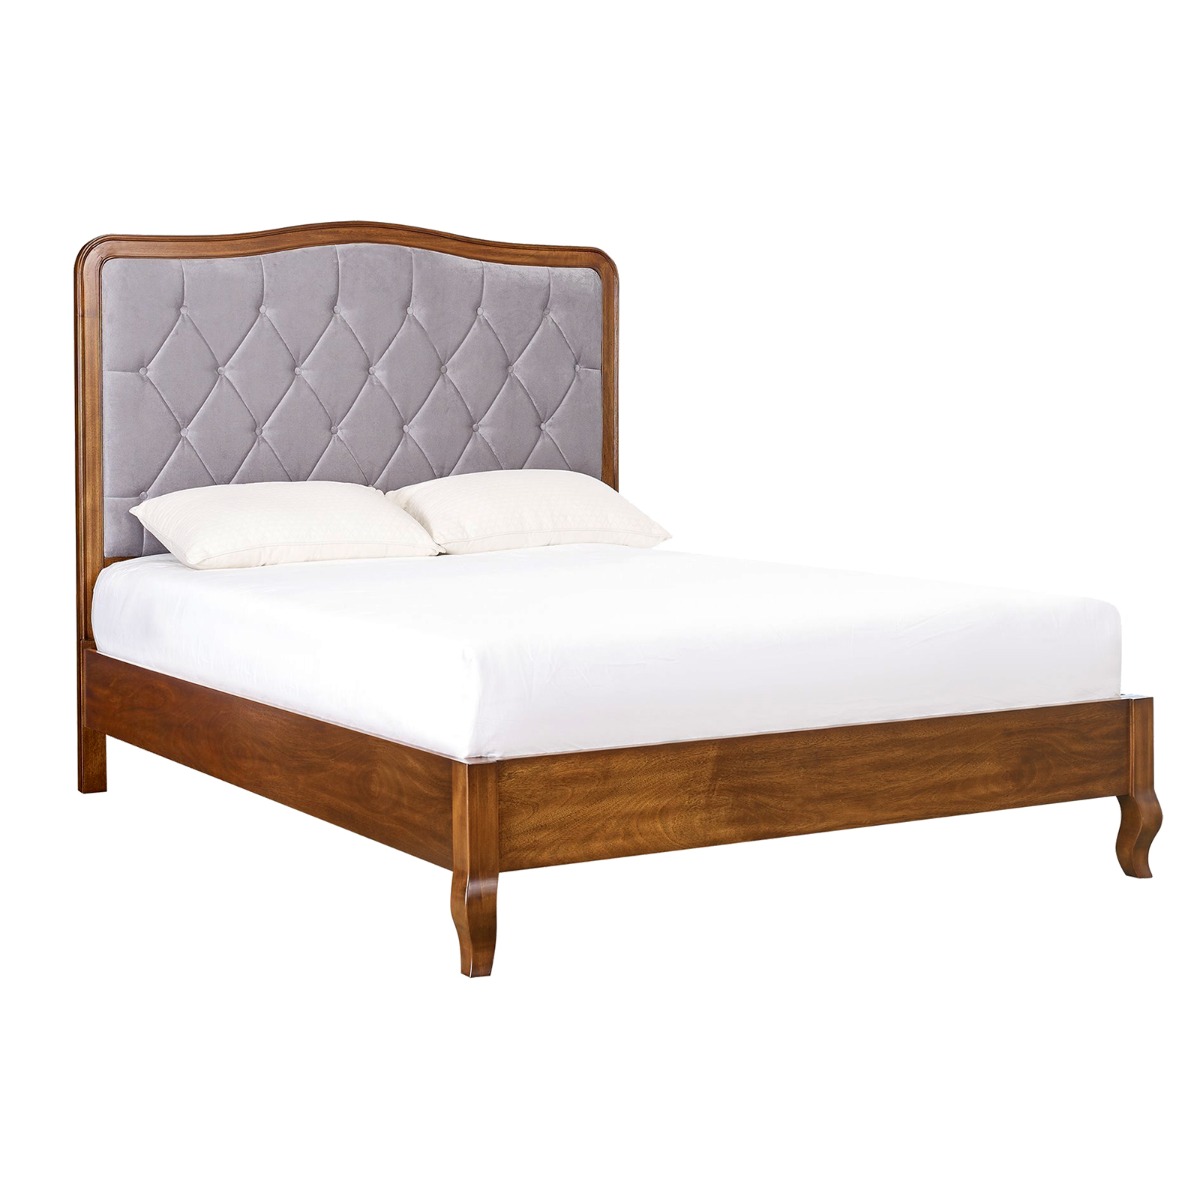 Audrey Double Bed in Red Chestnut